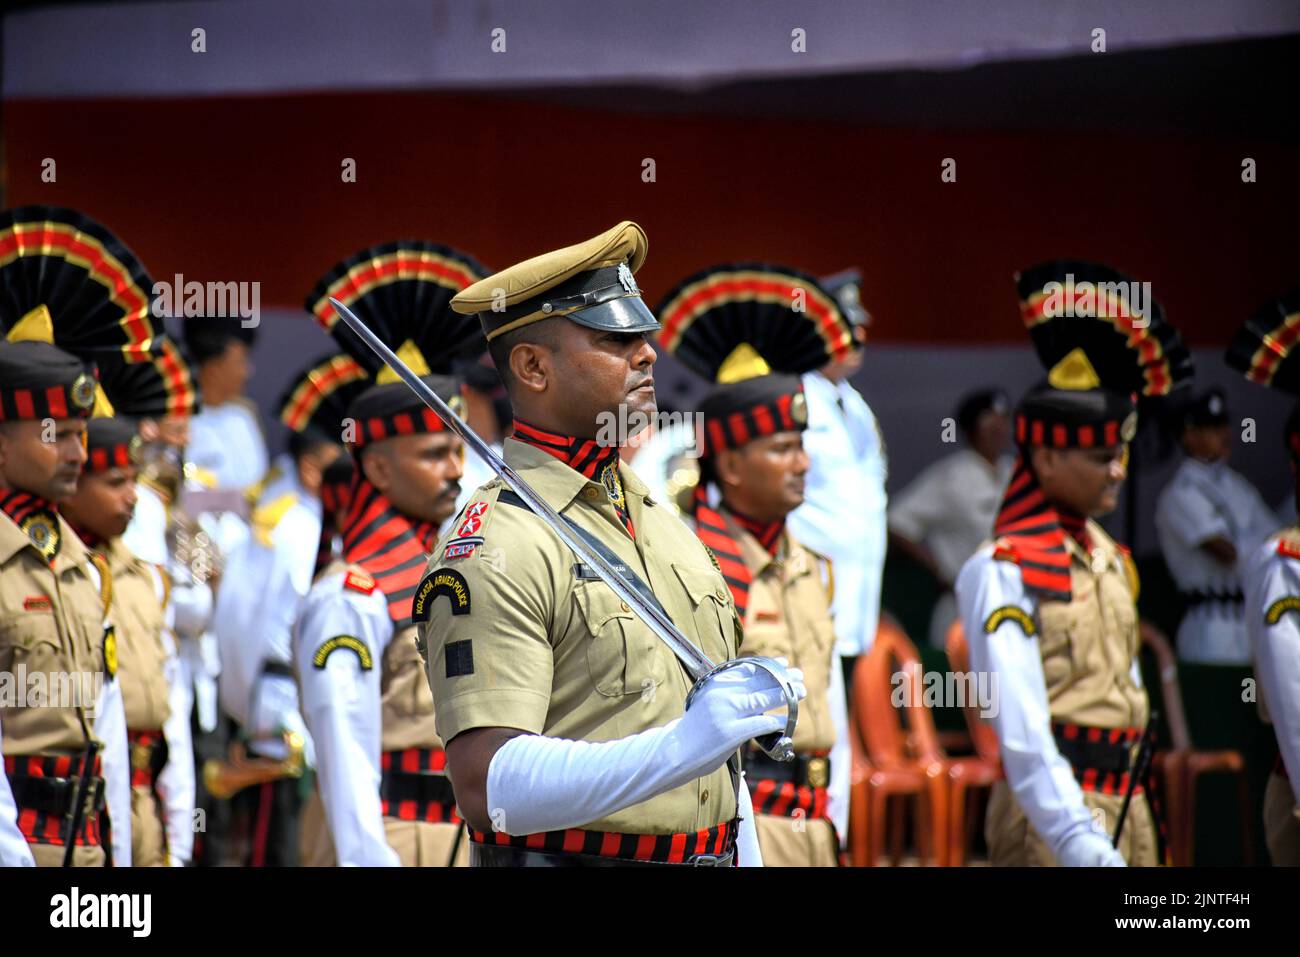 Rapid Action Force (RAF) team waiting for inspection during the Final Dress rehearsal during the Independence day Final Dress Rehearsal. India prepares to celebrate the 75th Independence day on 15th August 2022 as part of the Azadi Ka Amrit Mahotsav celebration. Stock Photo